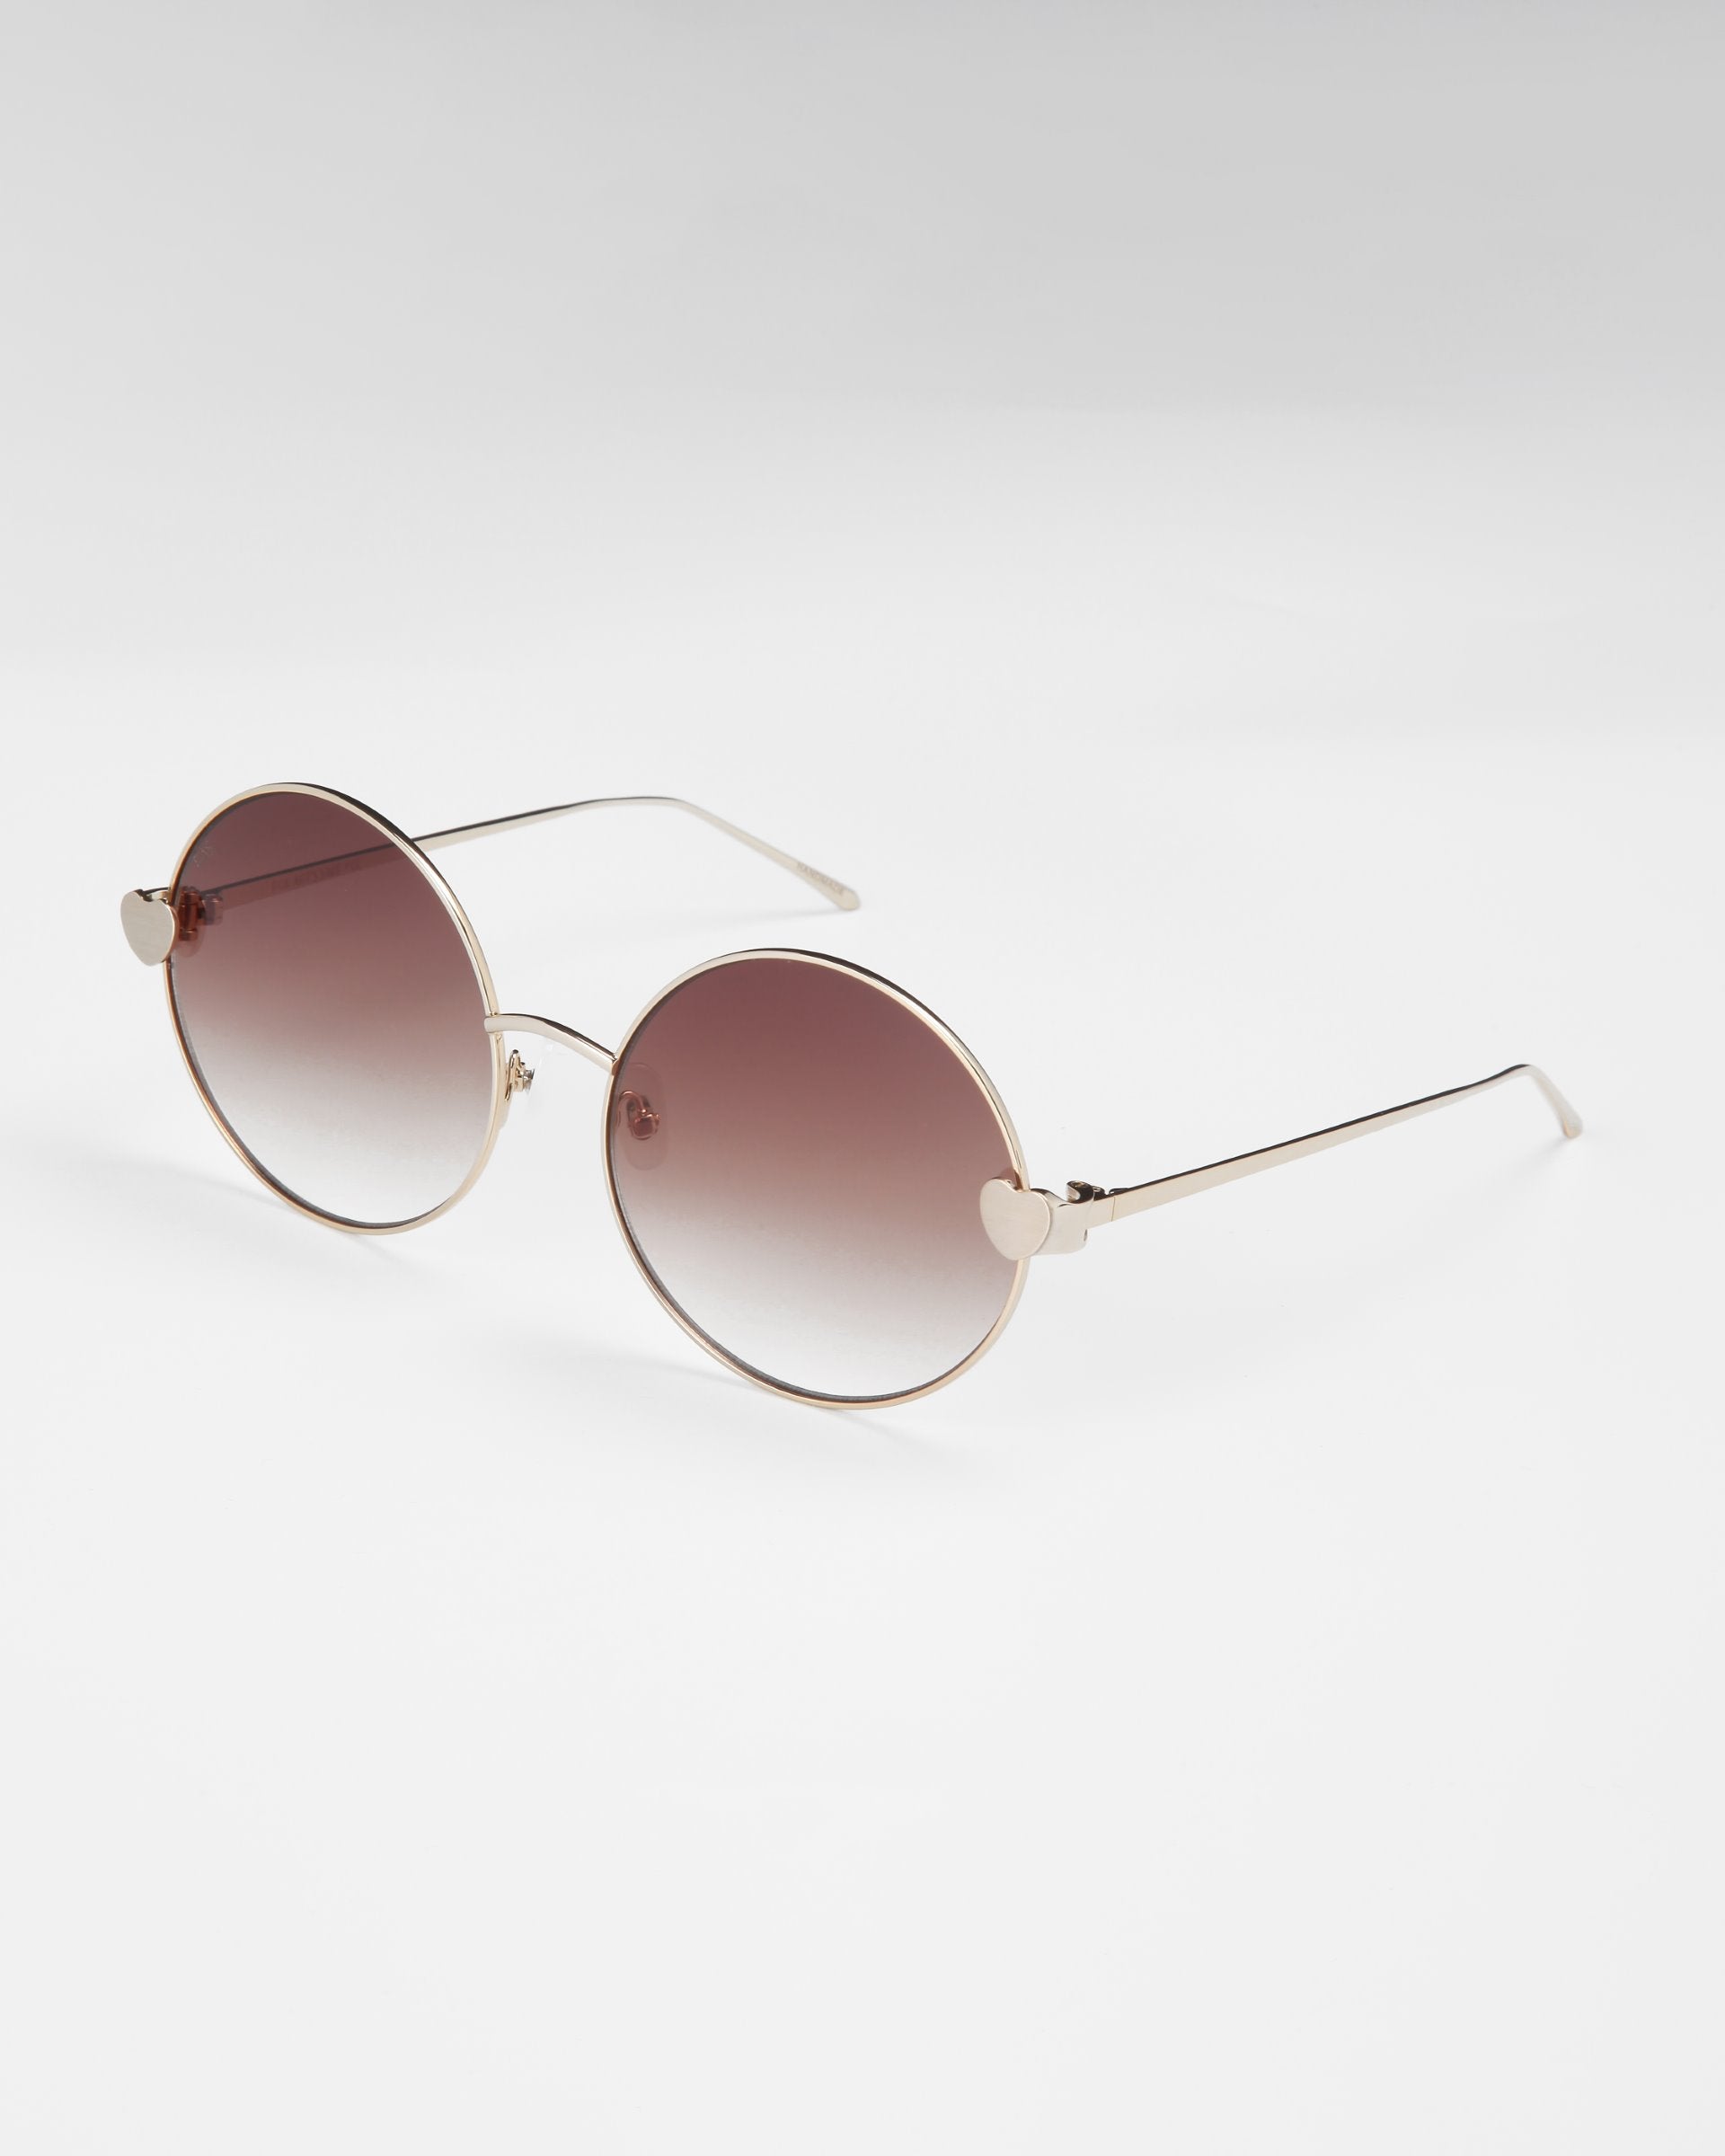 A pair of For Art's Sake® Love Story shades with round, gold-framed sunglasses featuring gradient brown lenses. The thin metal arms boast small heart-shaped accents near the hinges, and the jadestone nose pads ensure comfort. With 100% UV protection, these sunglasses rest elegantly on a light, neutral background.